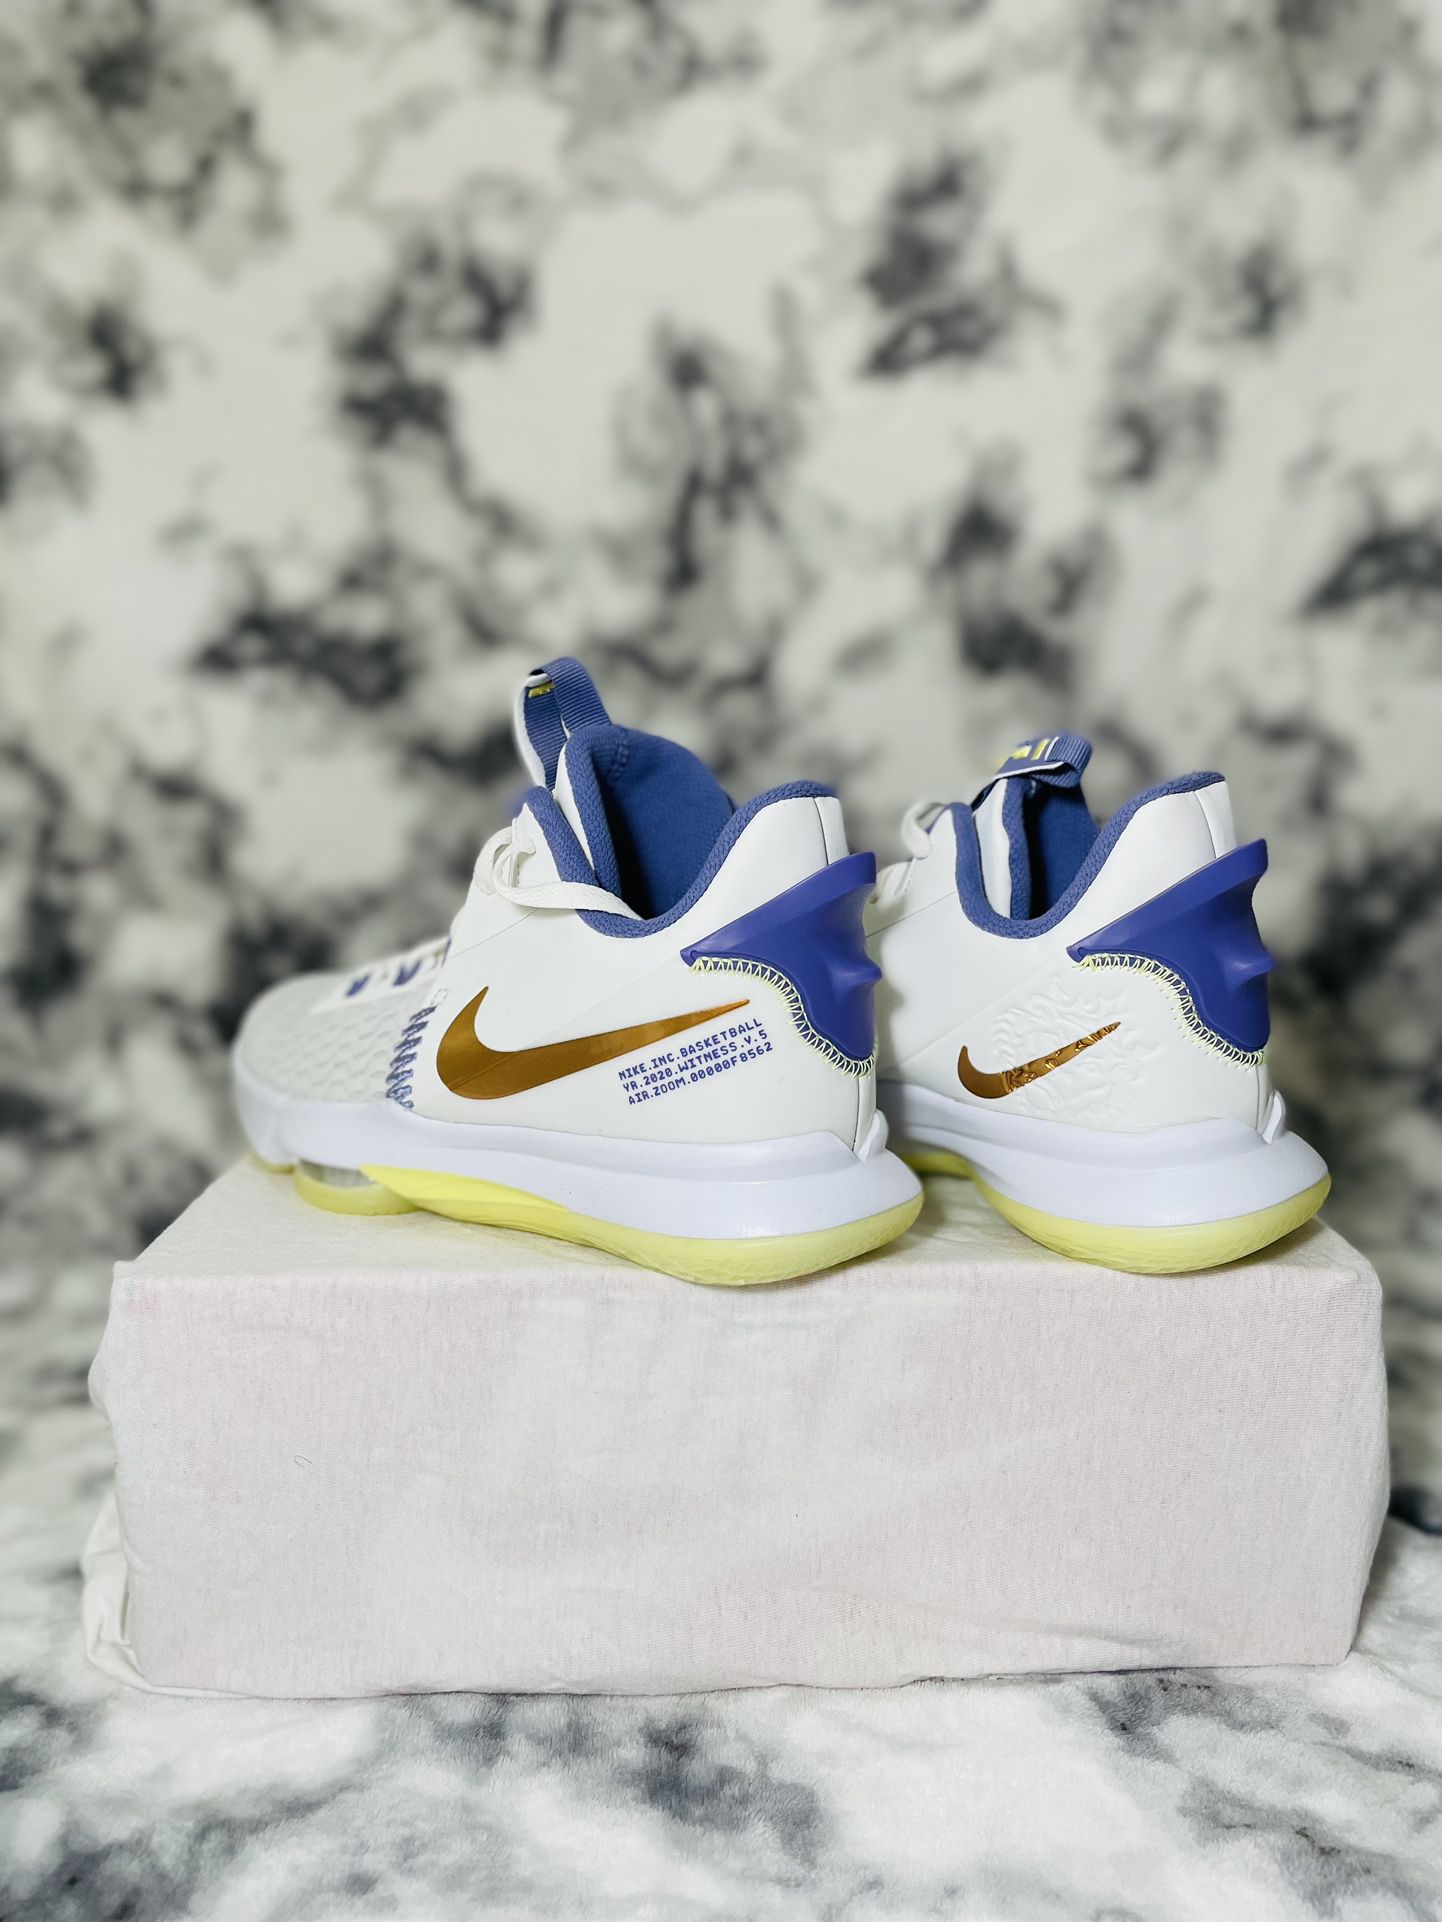 Nike Lebron Witness 5 White Purple Lakers Gold Basketball Shoes CQ9380-102  Men's Sz 11 for Sale in Newport Beach, CA - OfferUp